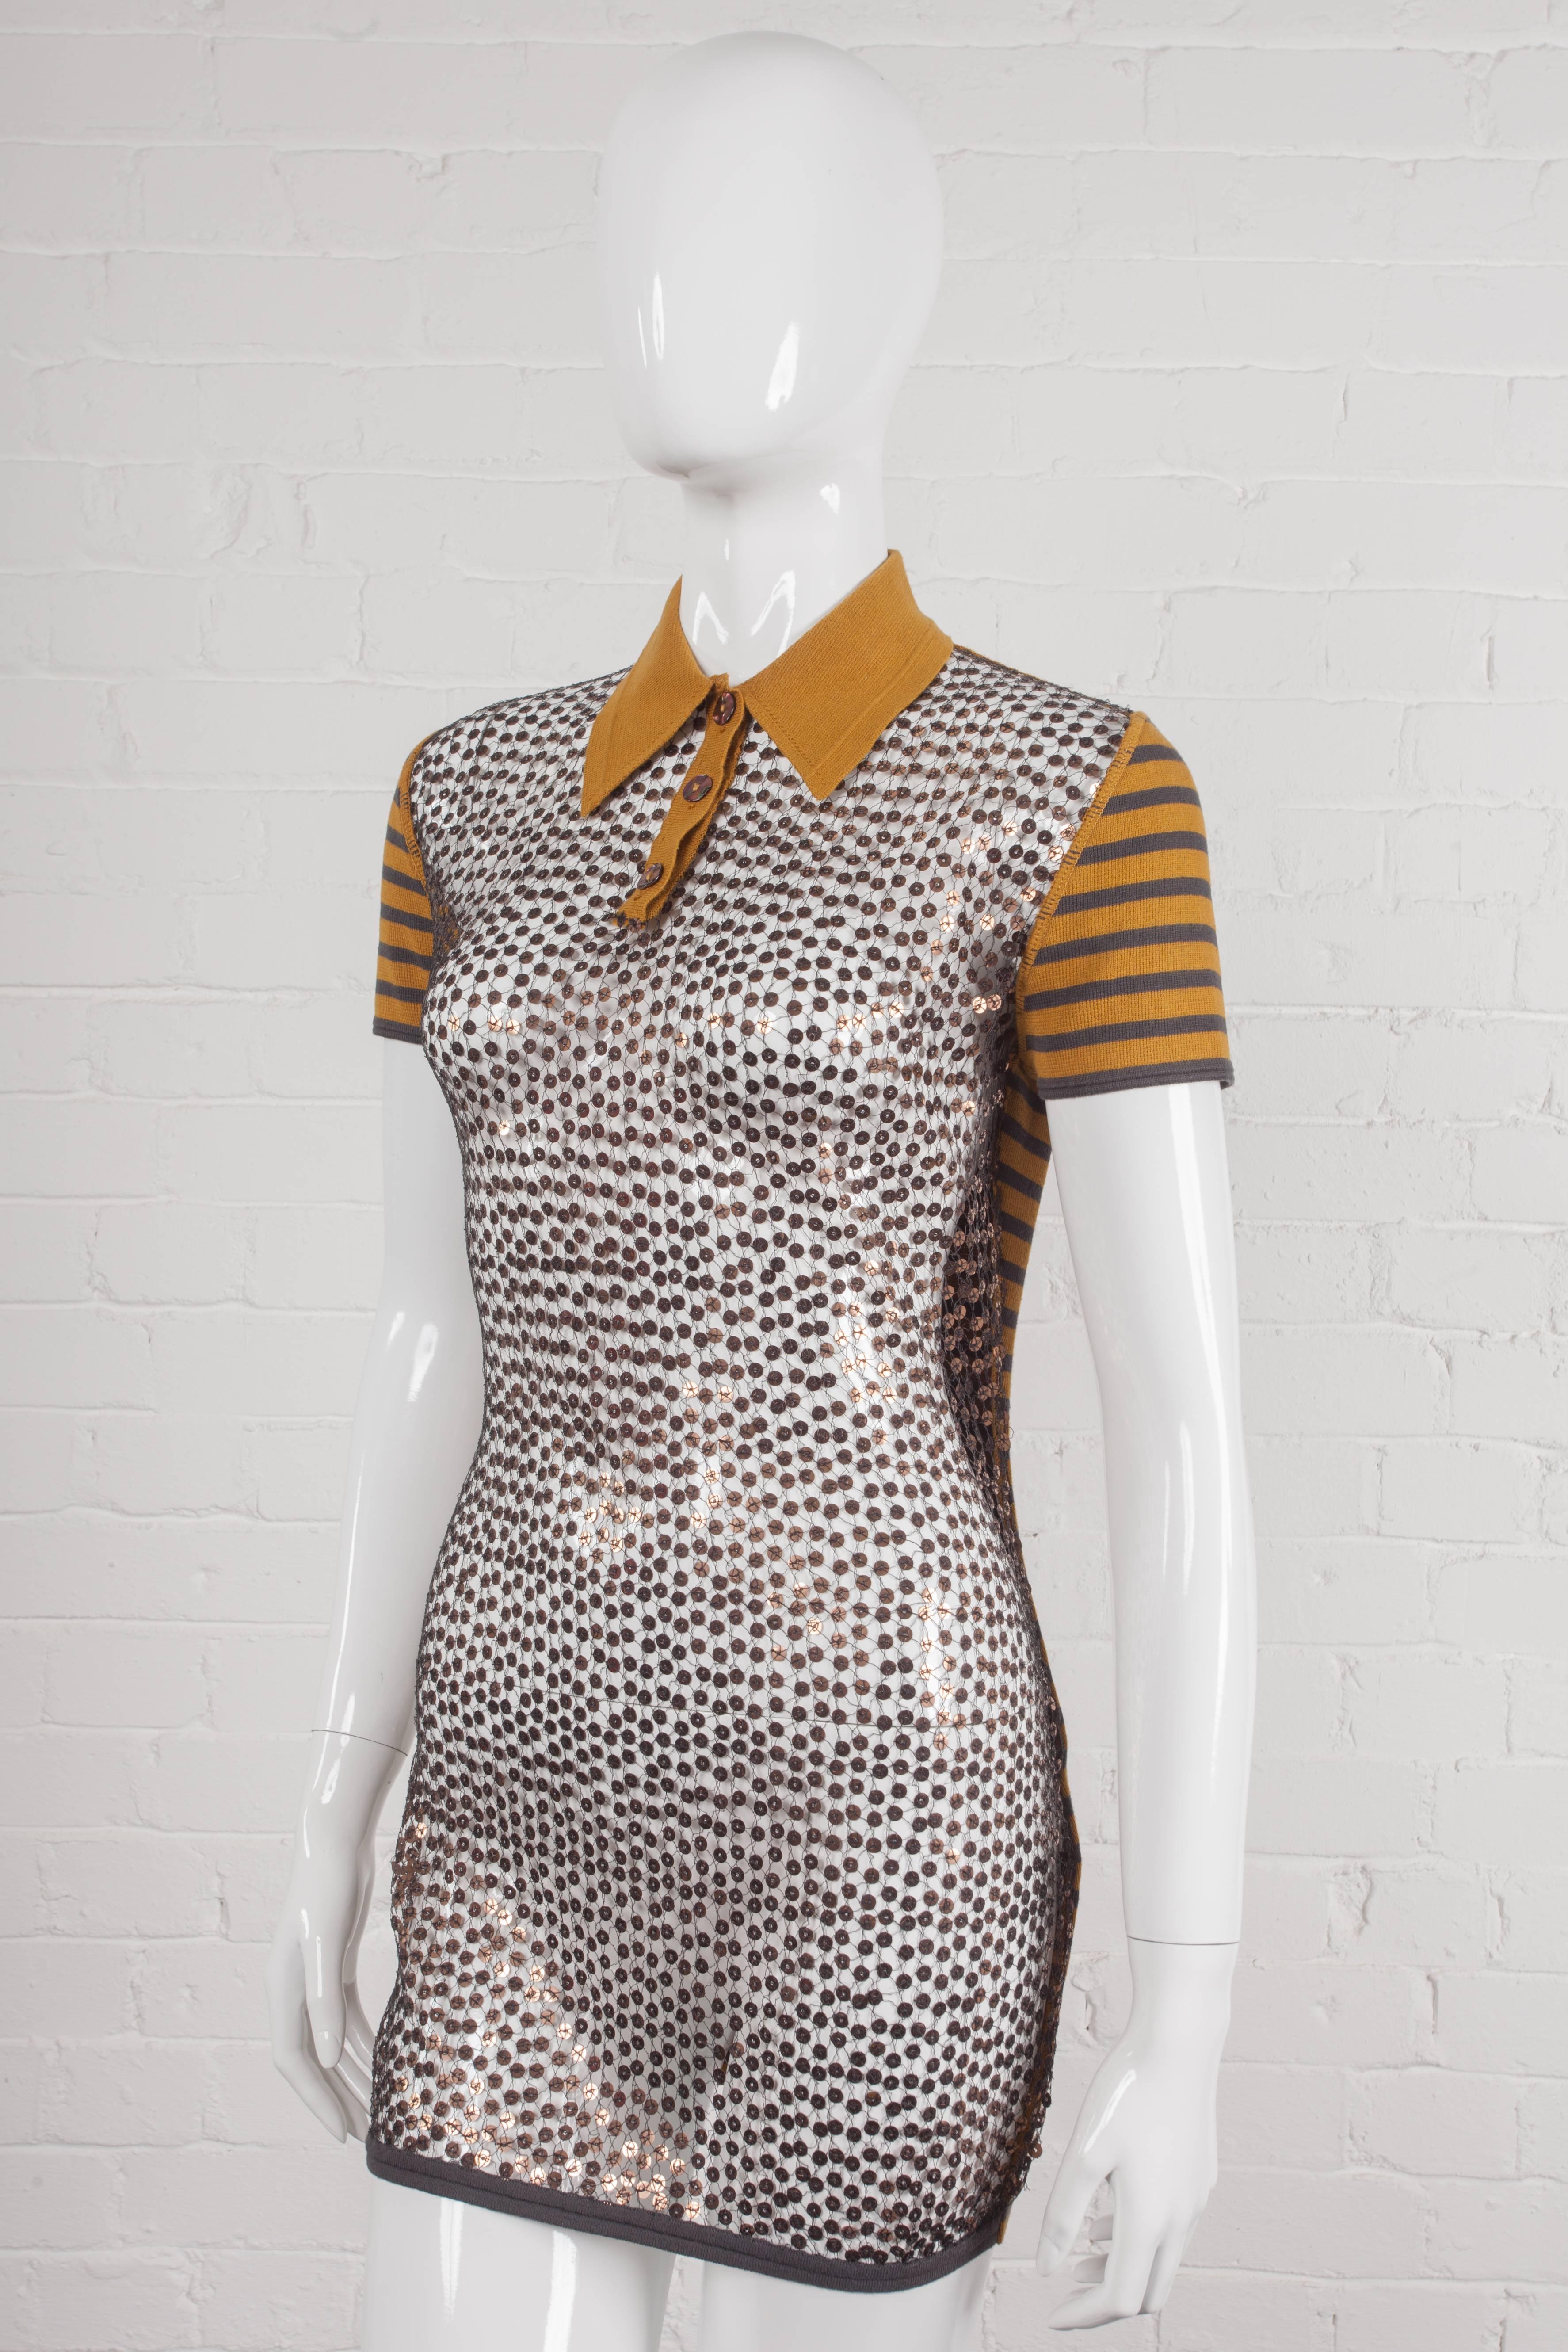 Long top with a sequinned see-through net front. From the Spring/Summer 1990 “Rap’Prayers” Collection. Features a polo neck collar and Mother of Pearl buttons, stretch cotton short sleeves and back section in contrasting stripes.
Period: 1980s –